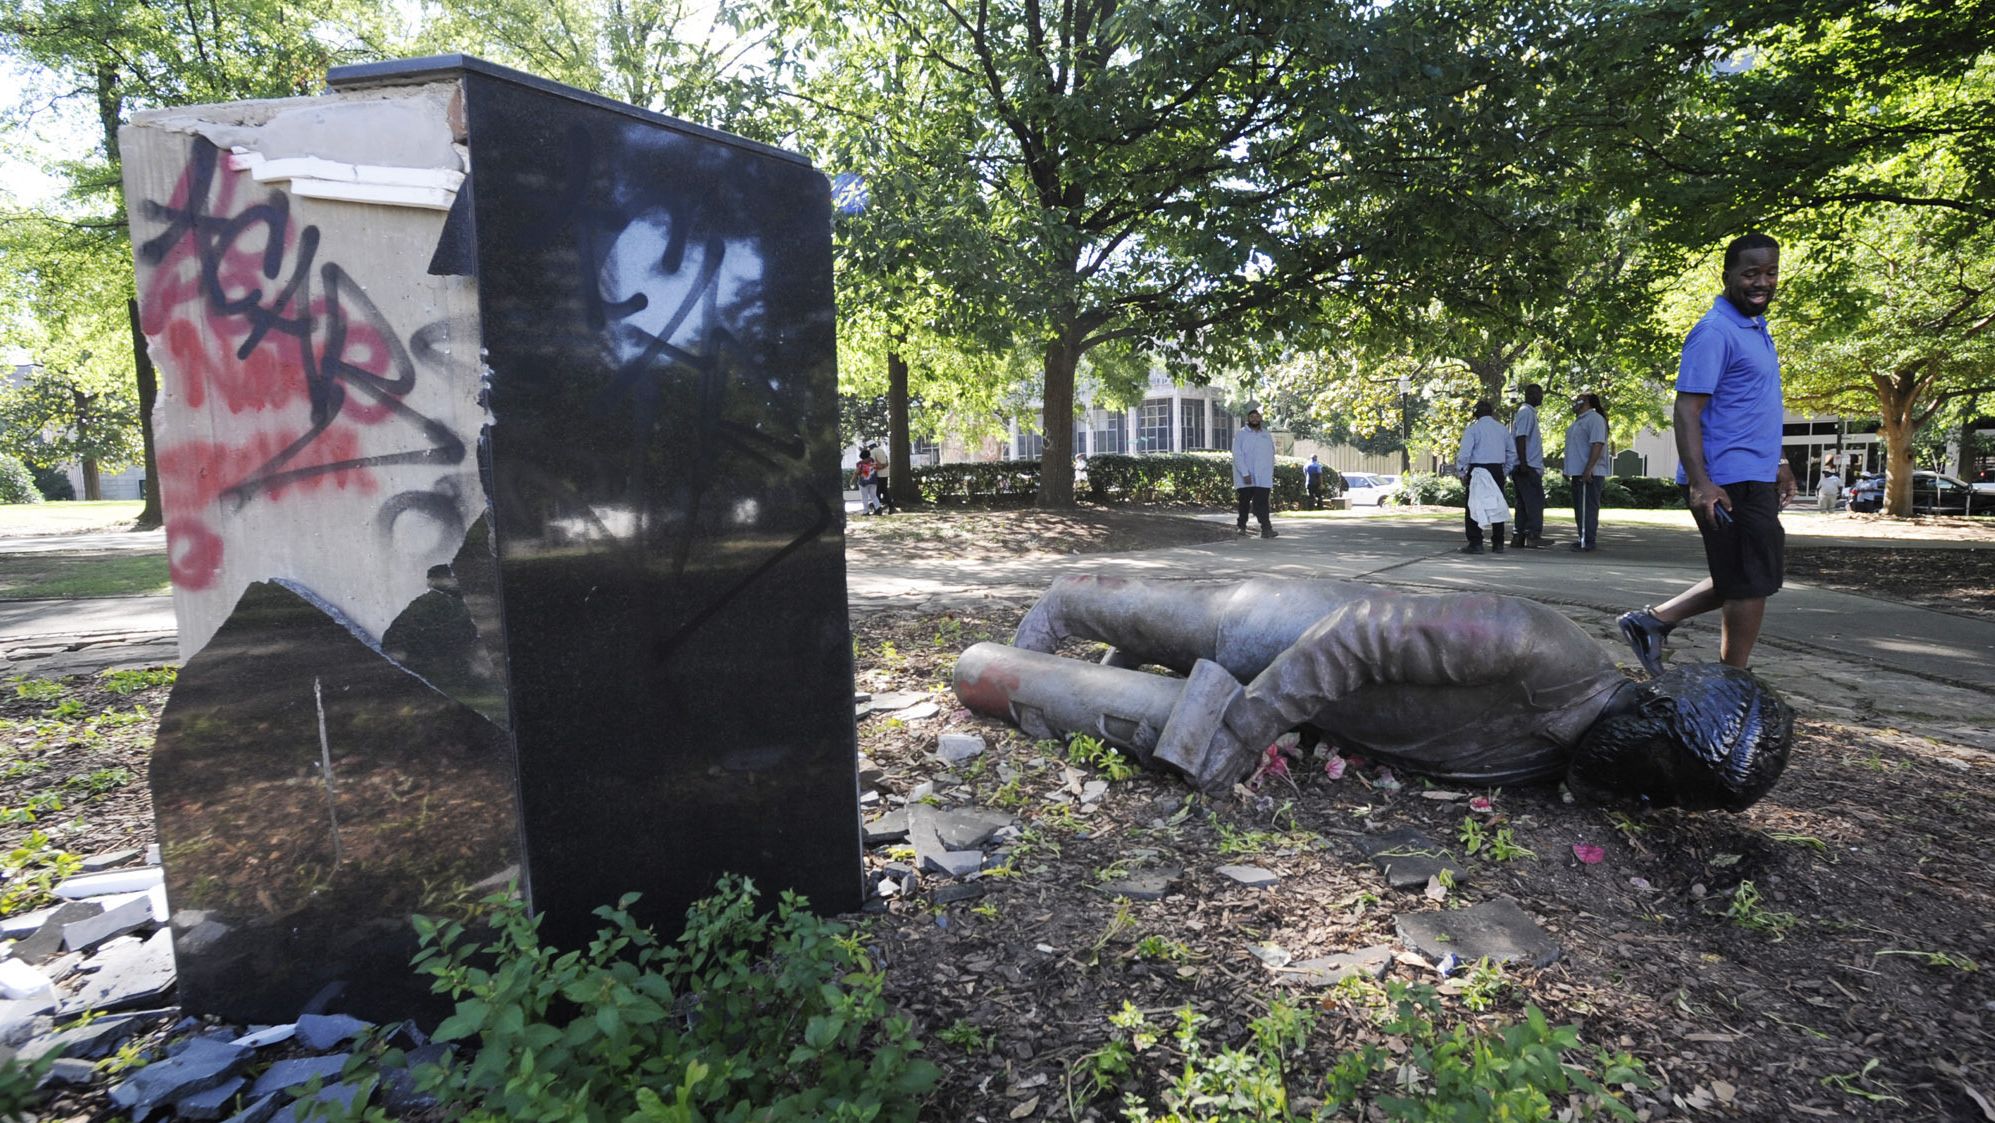 An unidentified man walks past a toppled statue of Charles Linn, a city founder who was in the Confederate Navy, in Birmingham, Ala., on Monday, June 1, 2020, following a night of unrest.